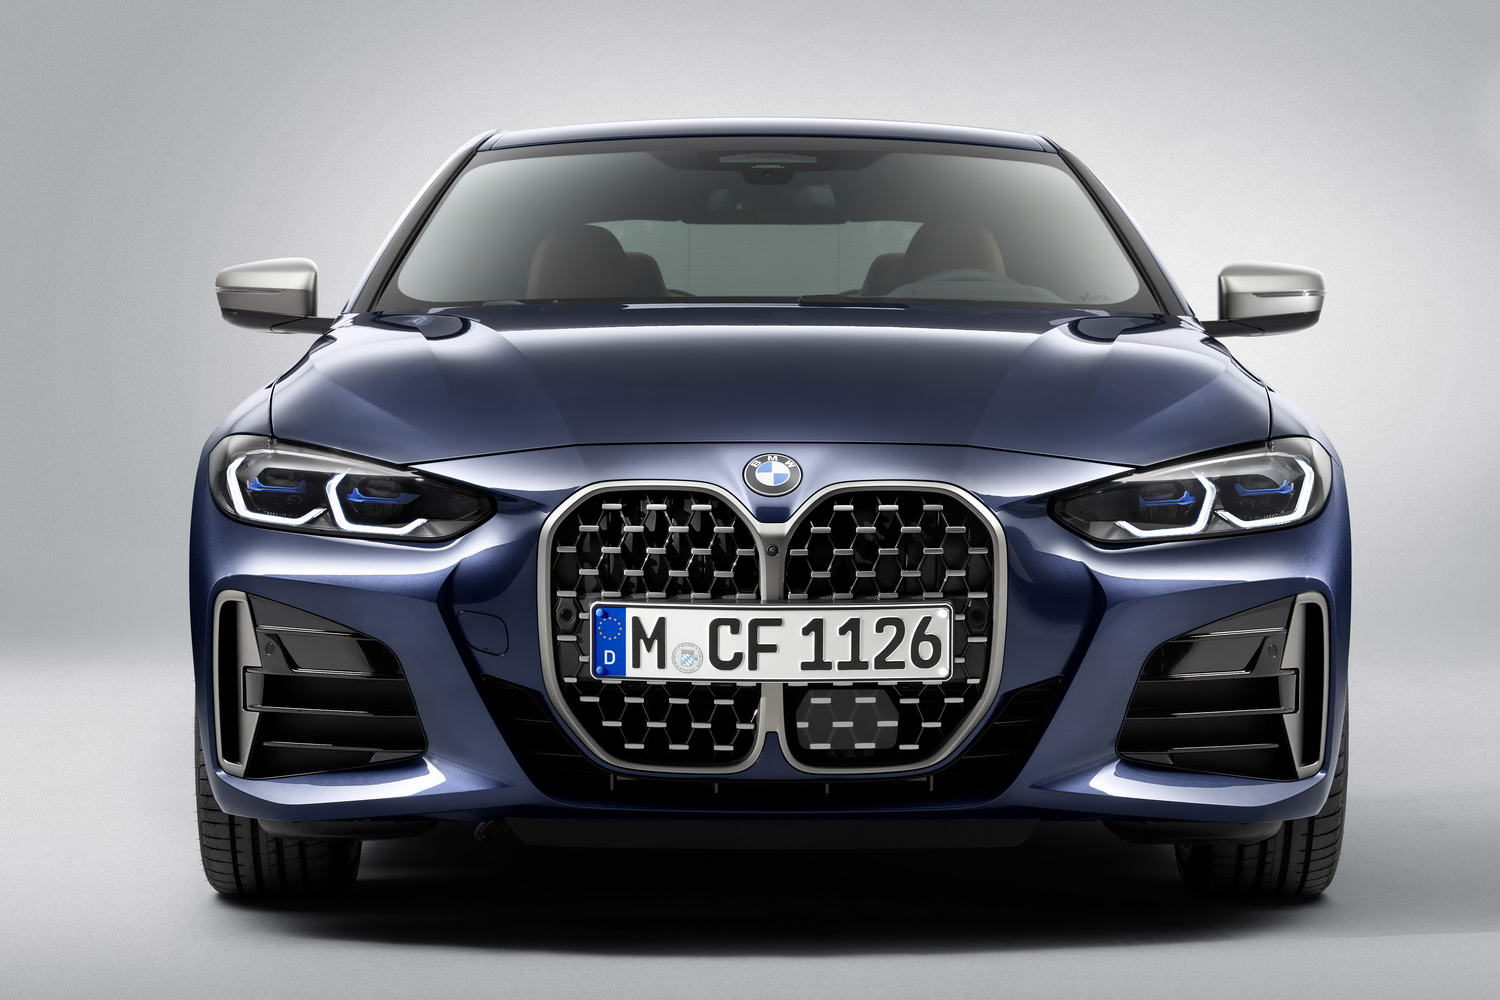 Daring new BMW 4 Series Coupe outed